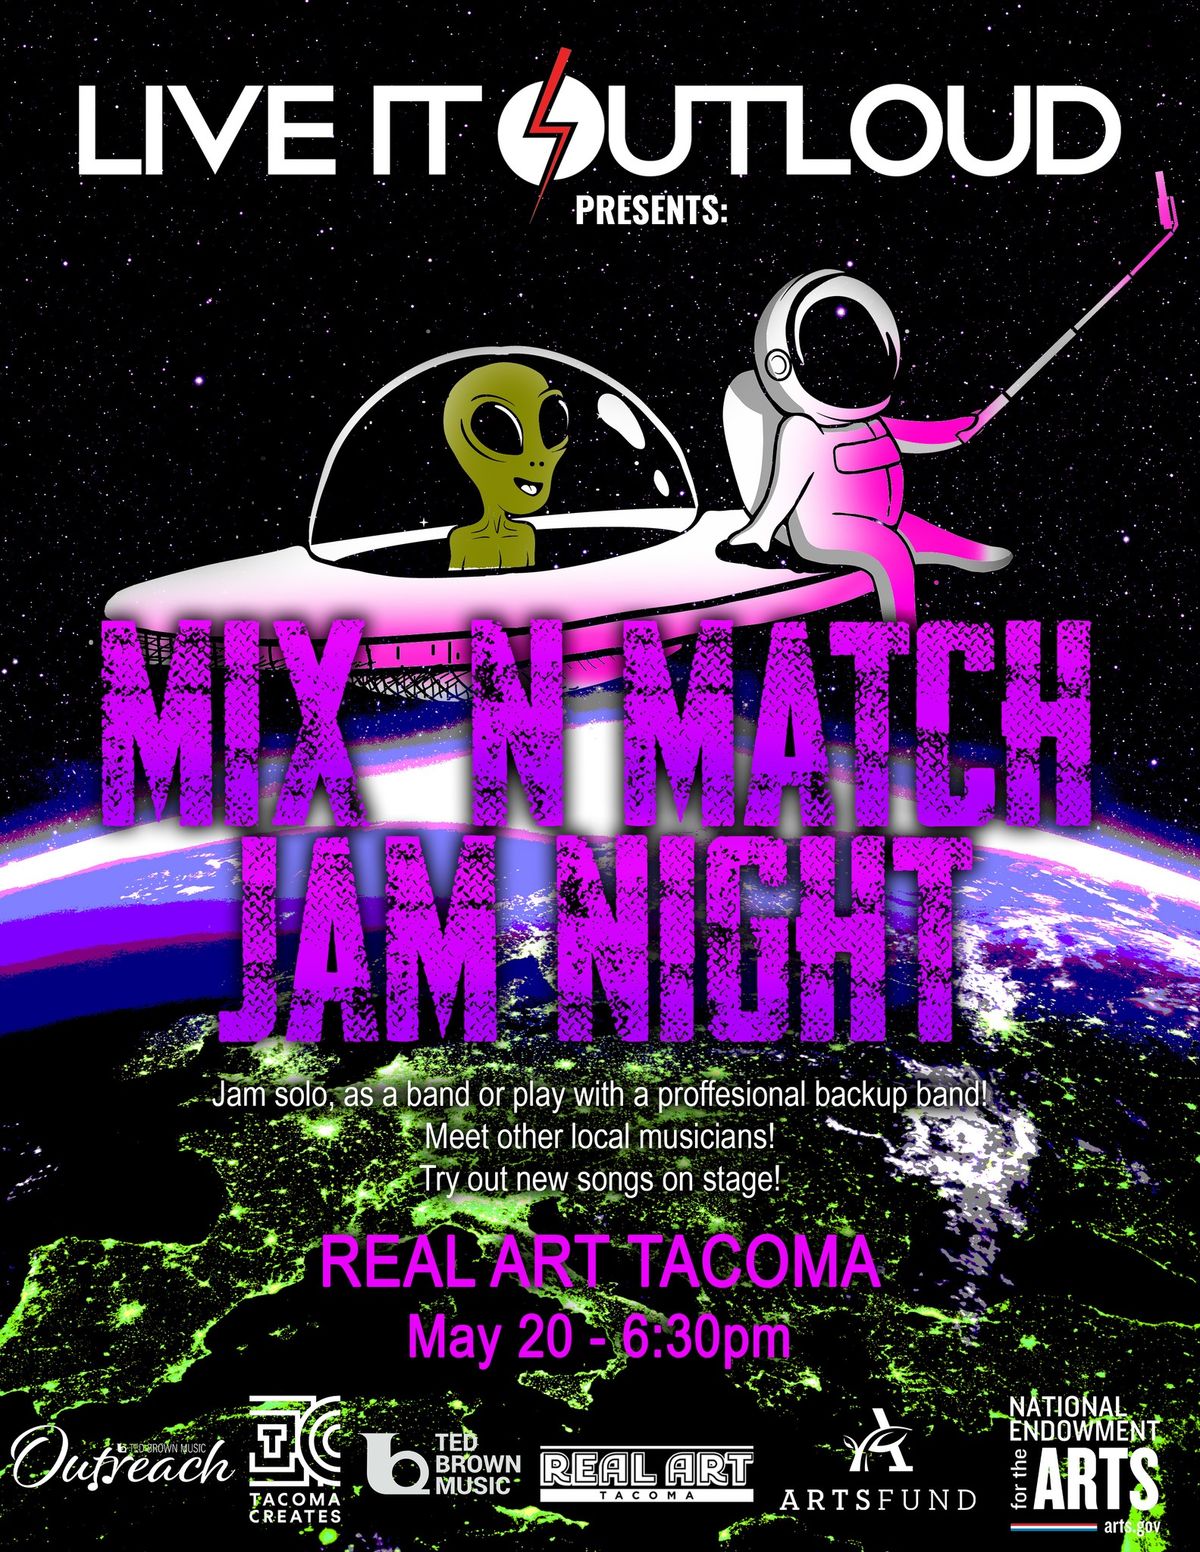 Live It Out Loud Presents: Mix N Match Jam Night